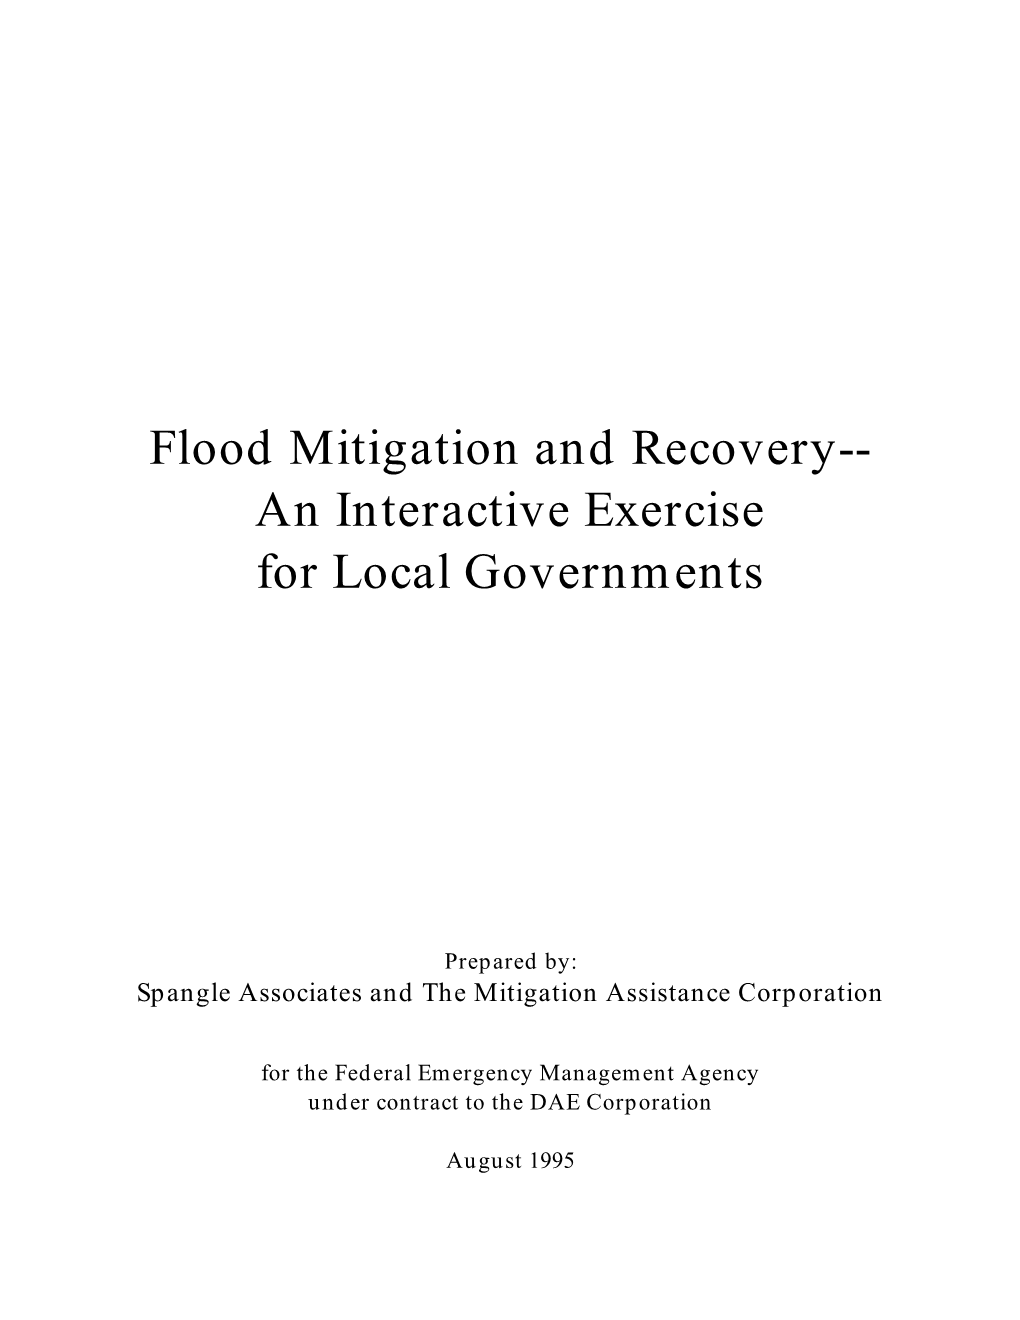 Flood Mitigation and Recovery-- an Interactive Exercise for Local Governments